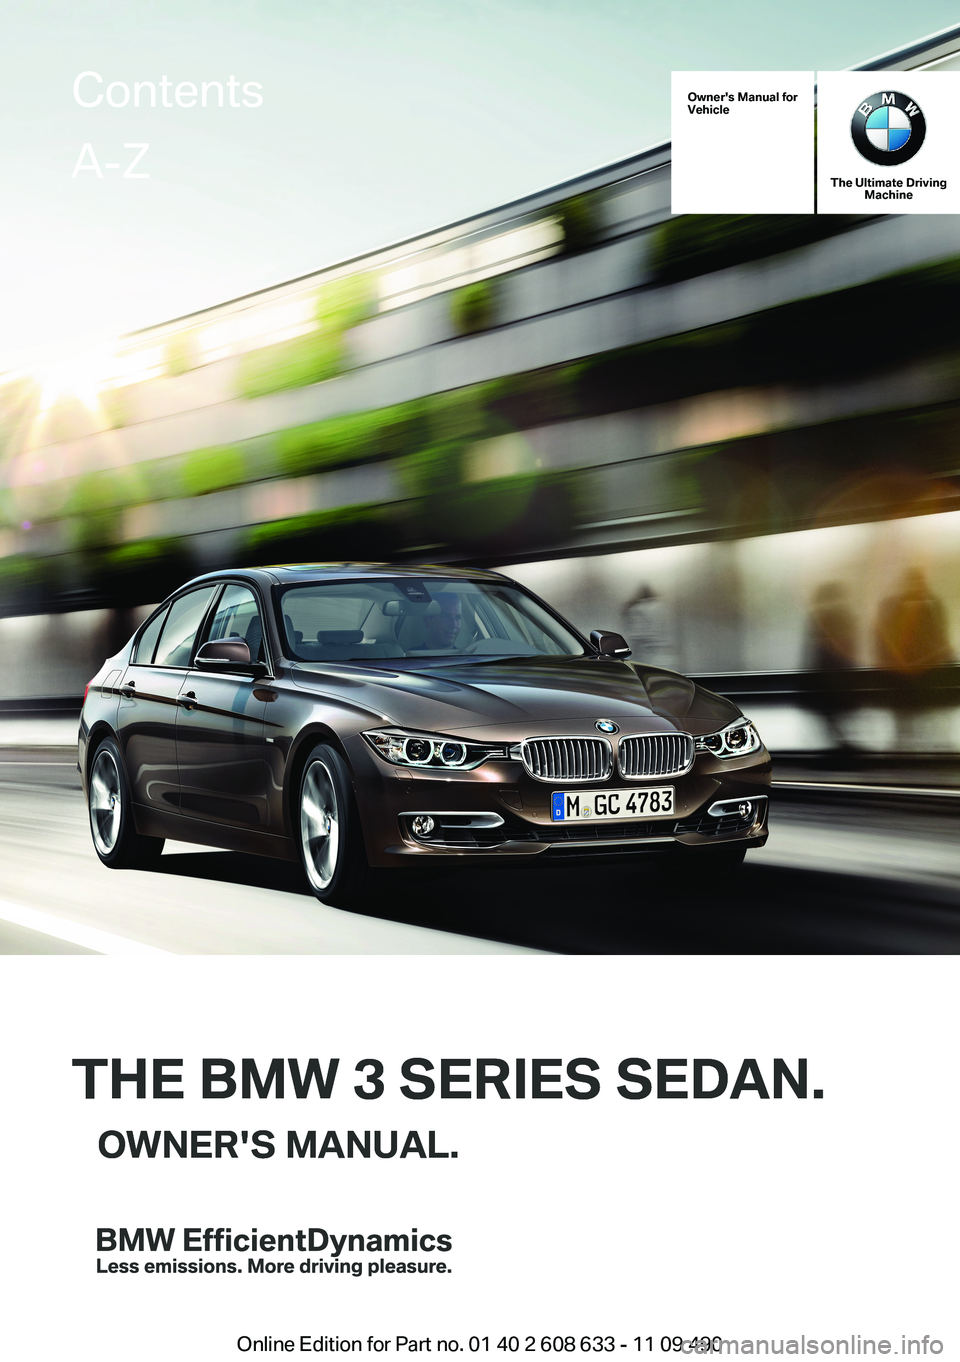 BMW 3 SERIES 2011  Owners Manual Owner's Manual forVehicle
THE BMW 3 SERIES SEDAN.
OWNER'S MANUAL.
The Ultimate DrivingMachine
THE BMW 3 SERIES SEDAN.
OWNER'S MANUAL.
Contents
A-Z
Online Edition for Part no. 01 40 2 608 6